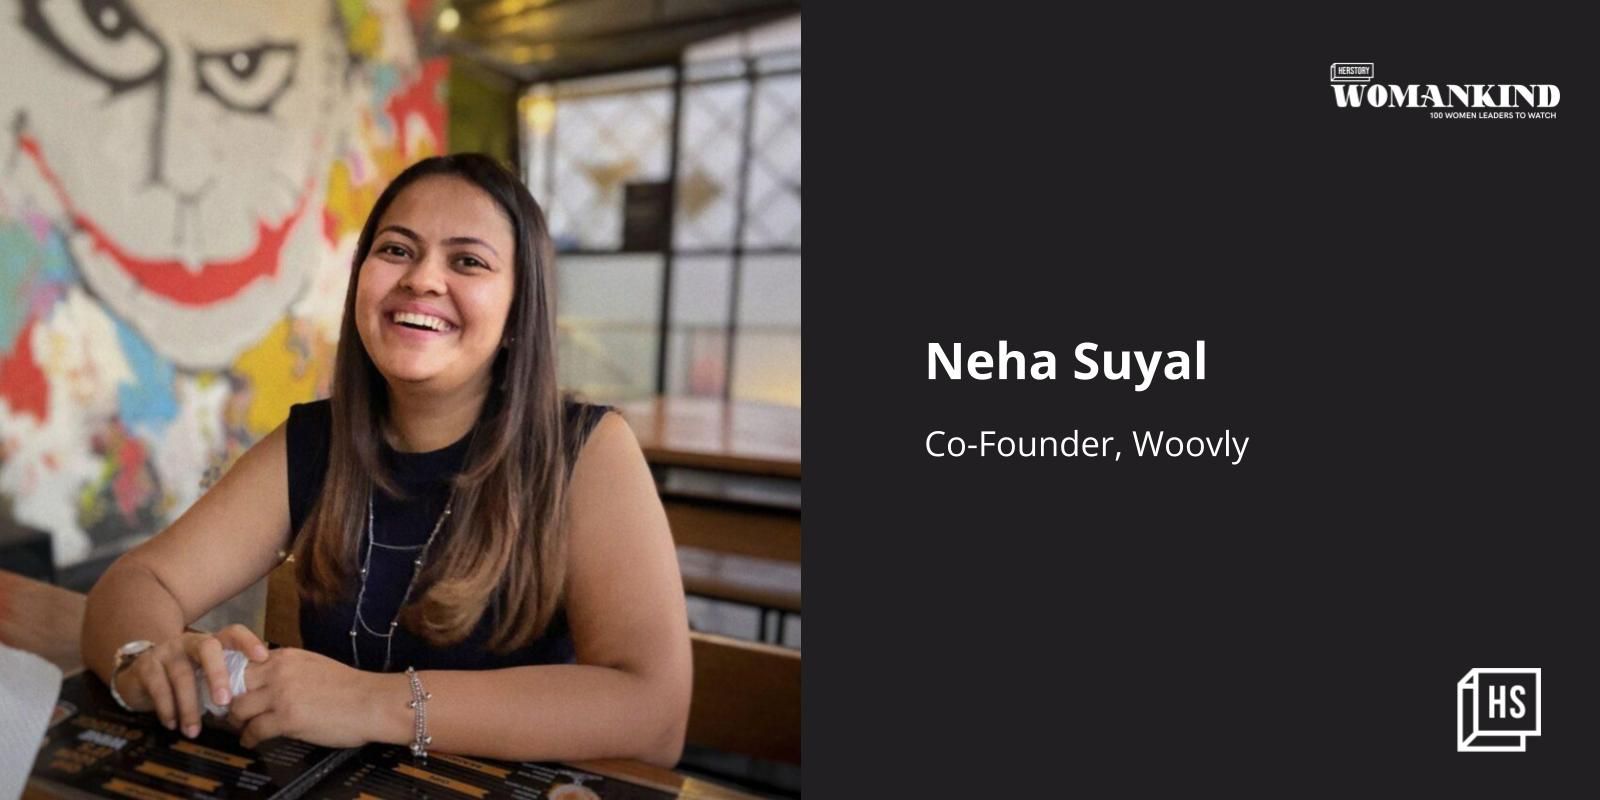 [100 Emerging Women Leaders] Neha Suyal is turning lifestyle of millennials in India’s hinterlands into reality